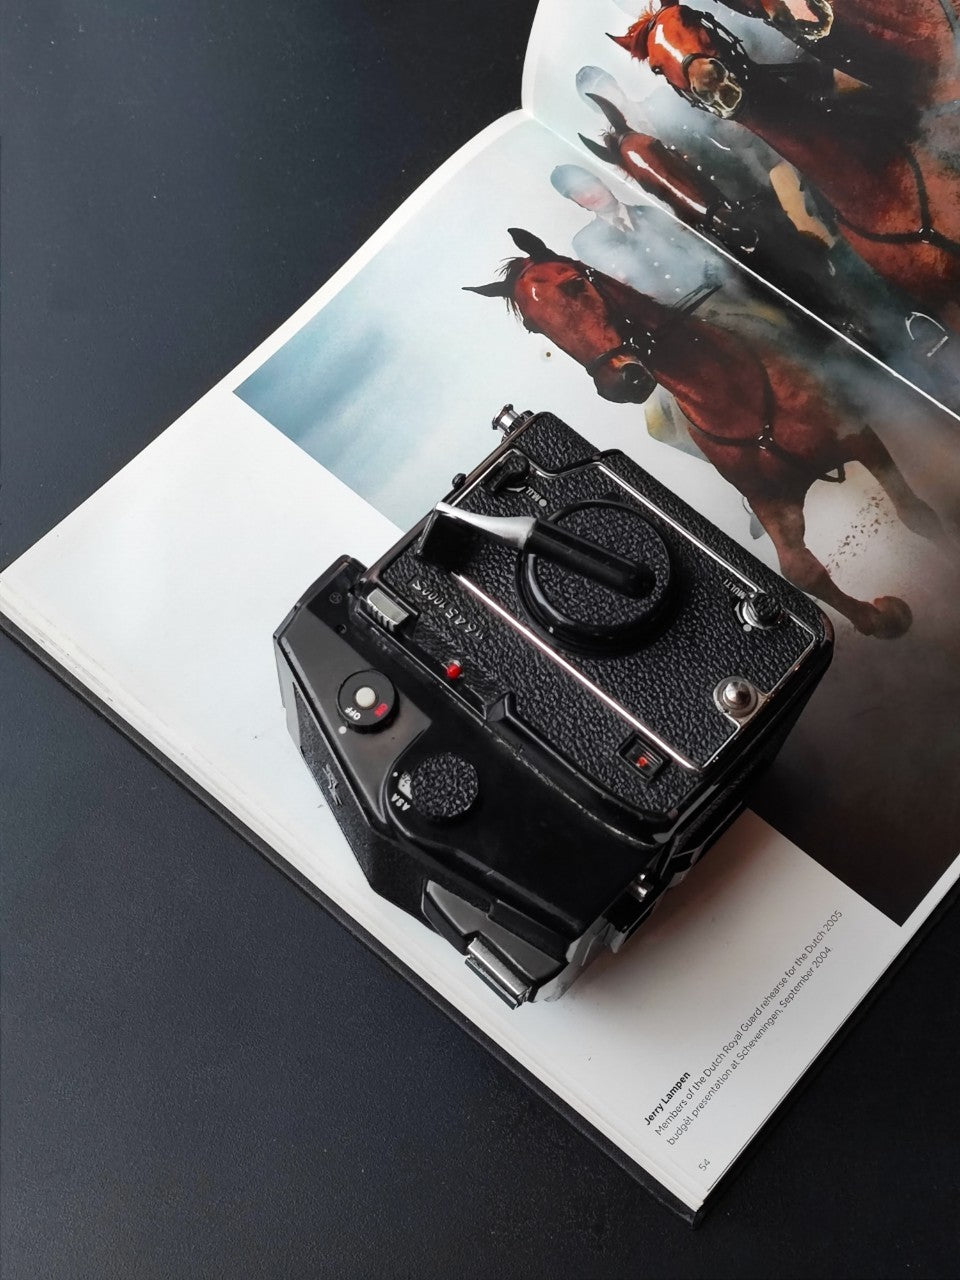 [Sold as-is] Mamiya M645 1000s